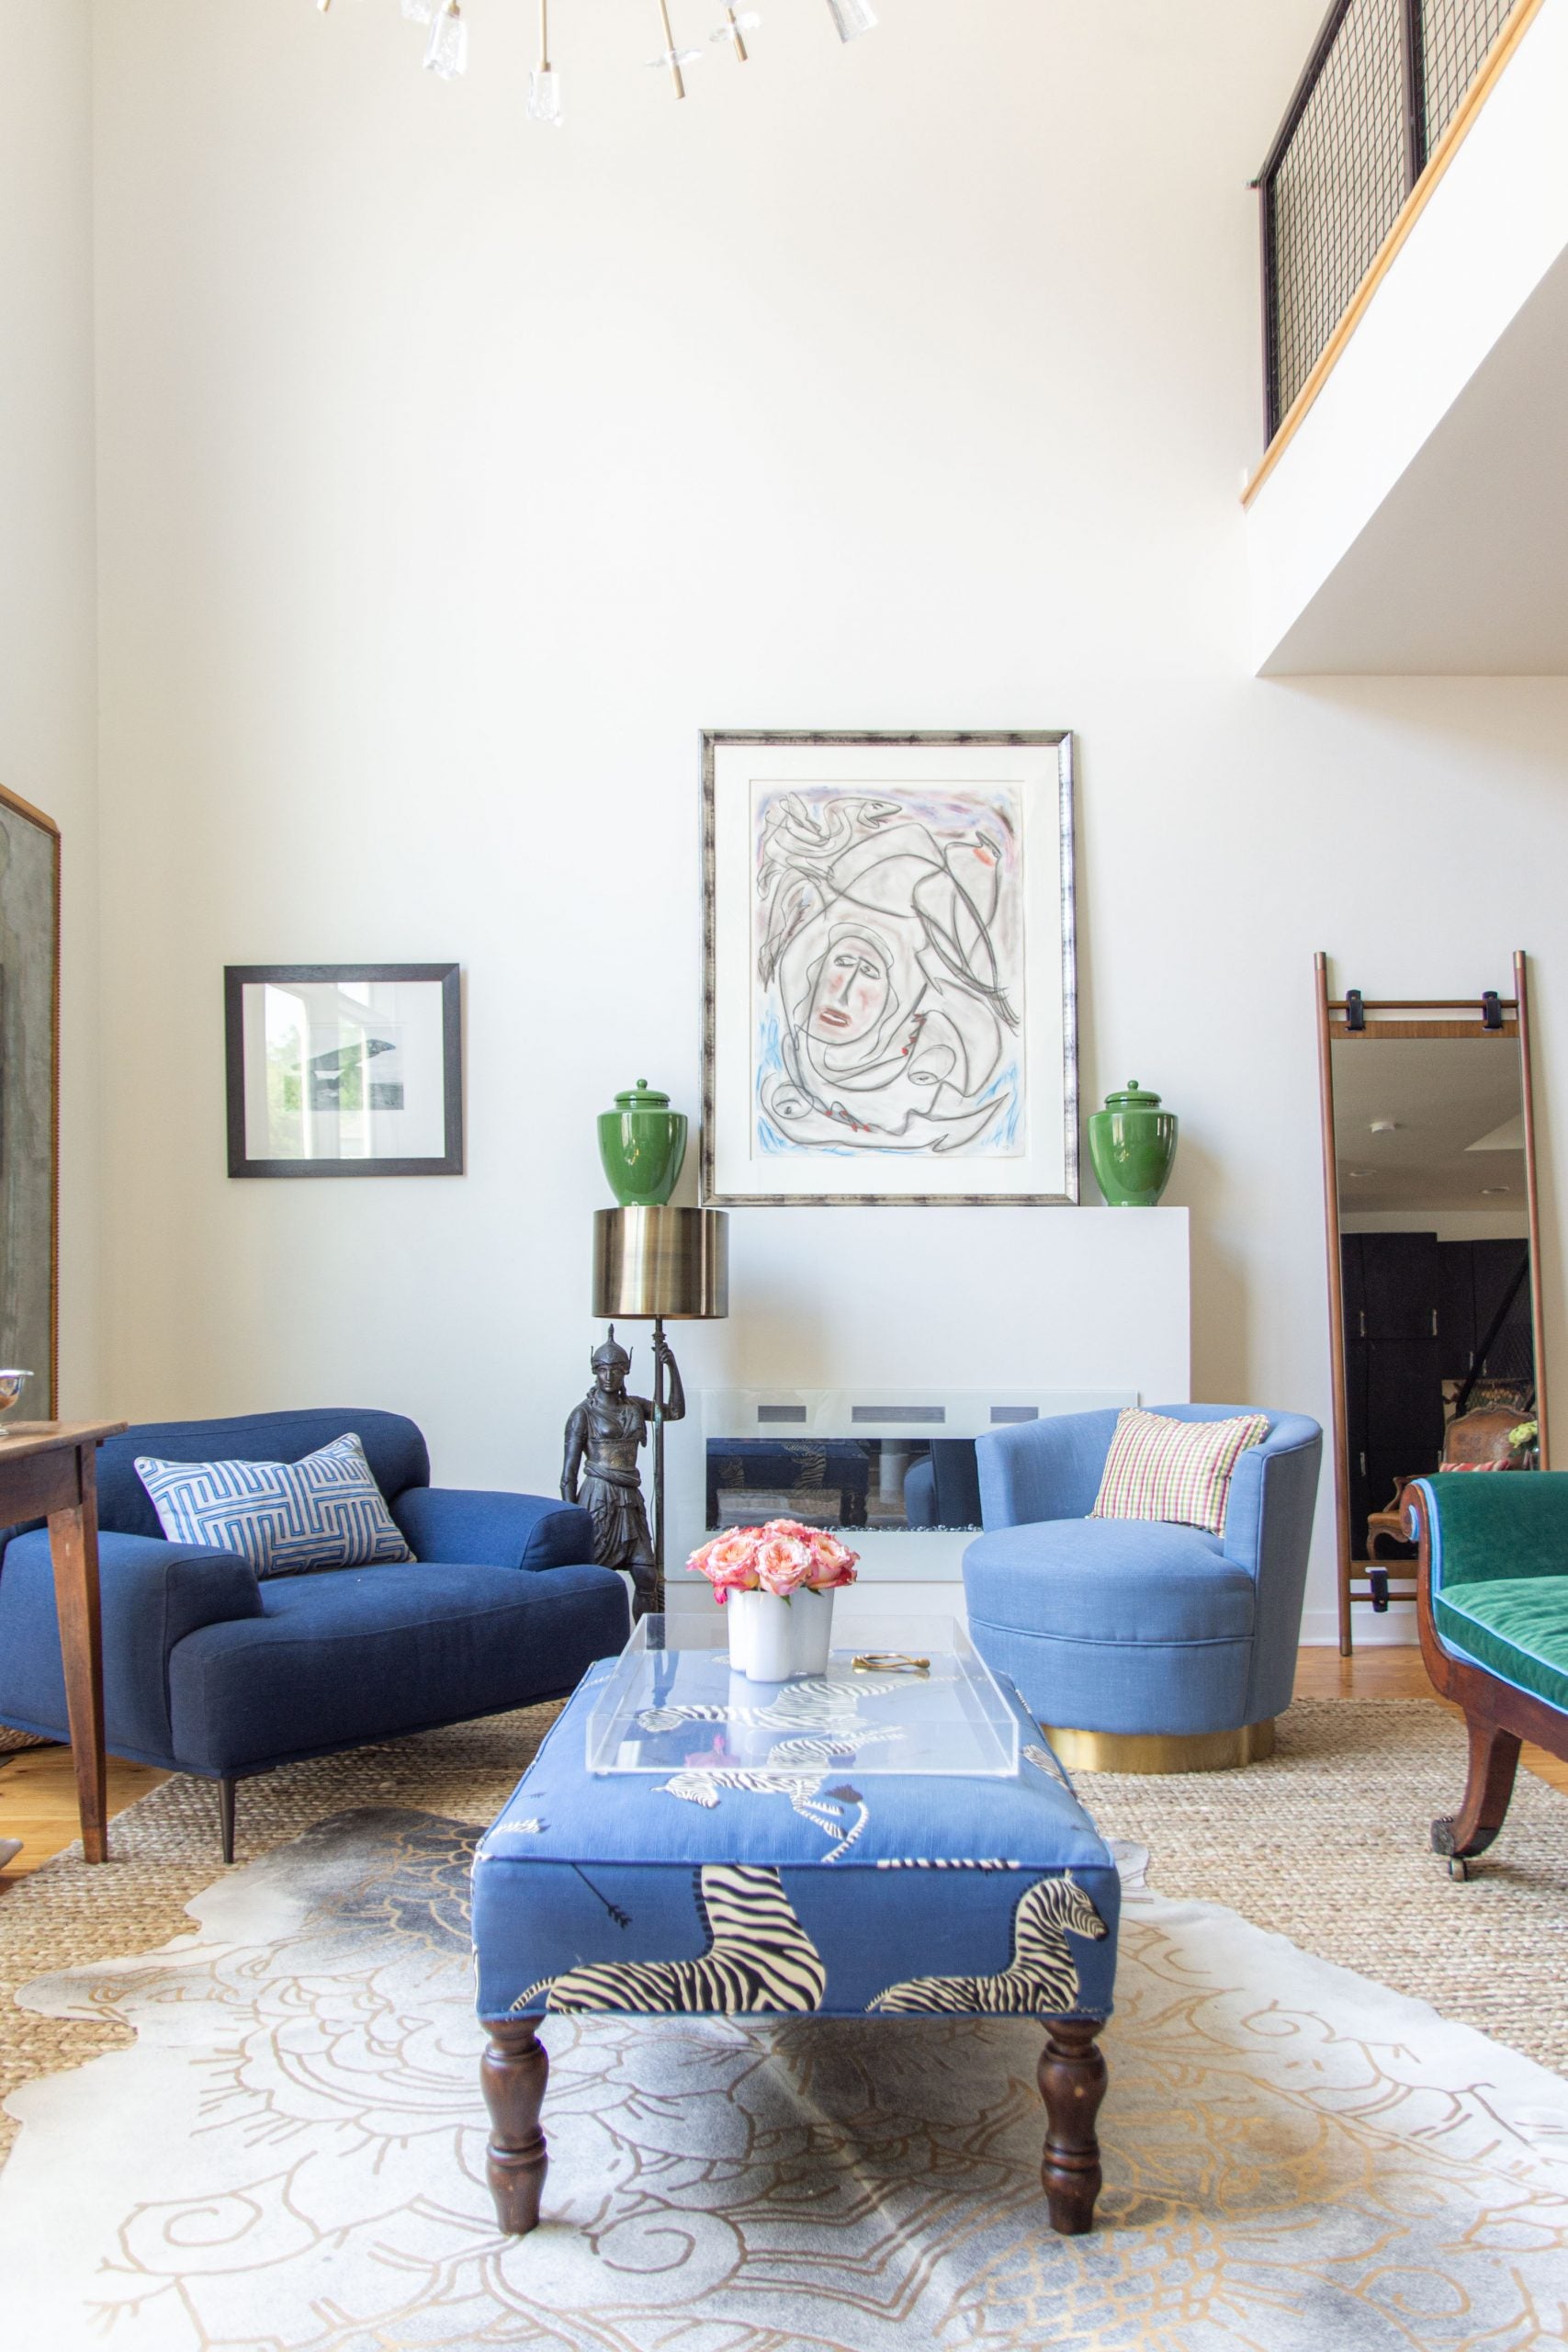 Double-story living room with blue sofa, green chaise, cowhide rug, Article Abisko chair, and sputnik chandelier by Kevin O'Gara on Thou Swell #livingroom #livingroomdesign #homedecor #interiordesign #homedesign #homedecorideas